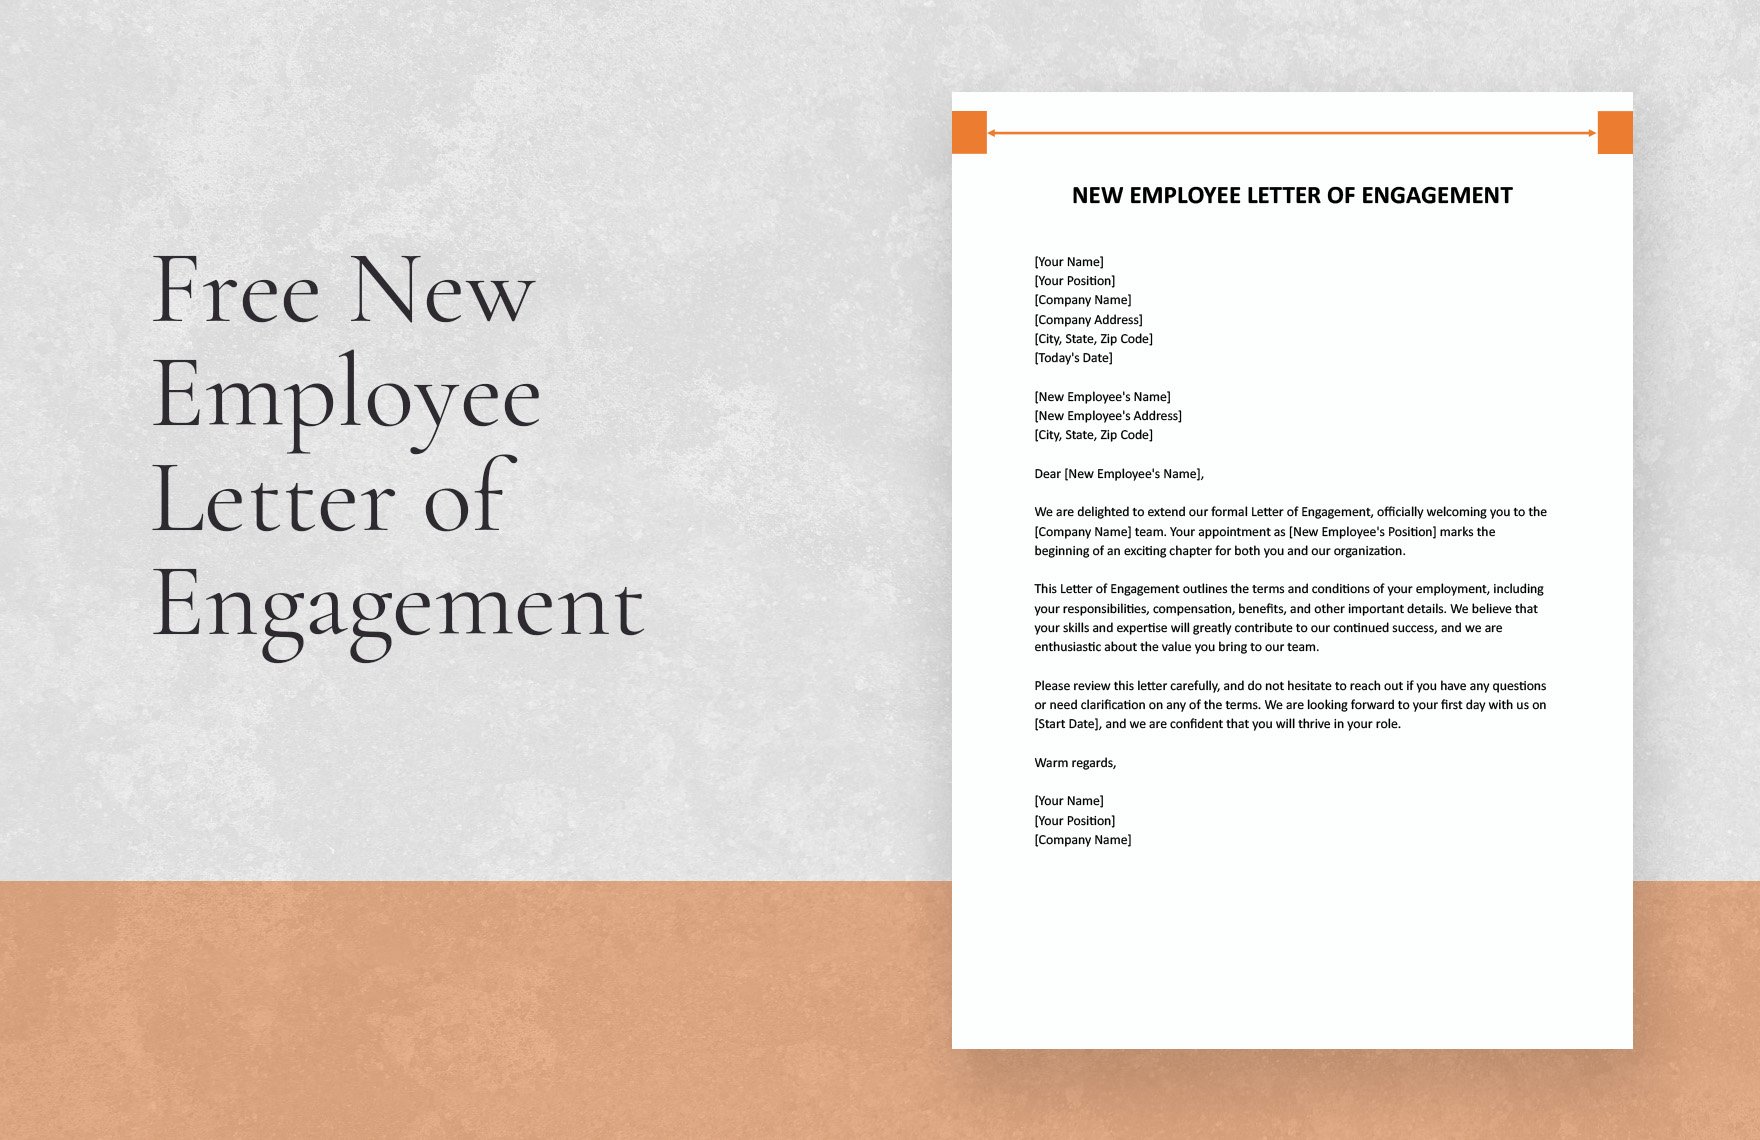 New Employee Letter of Engagement